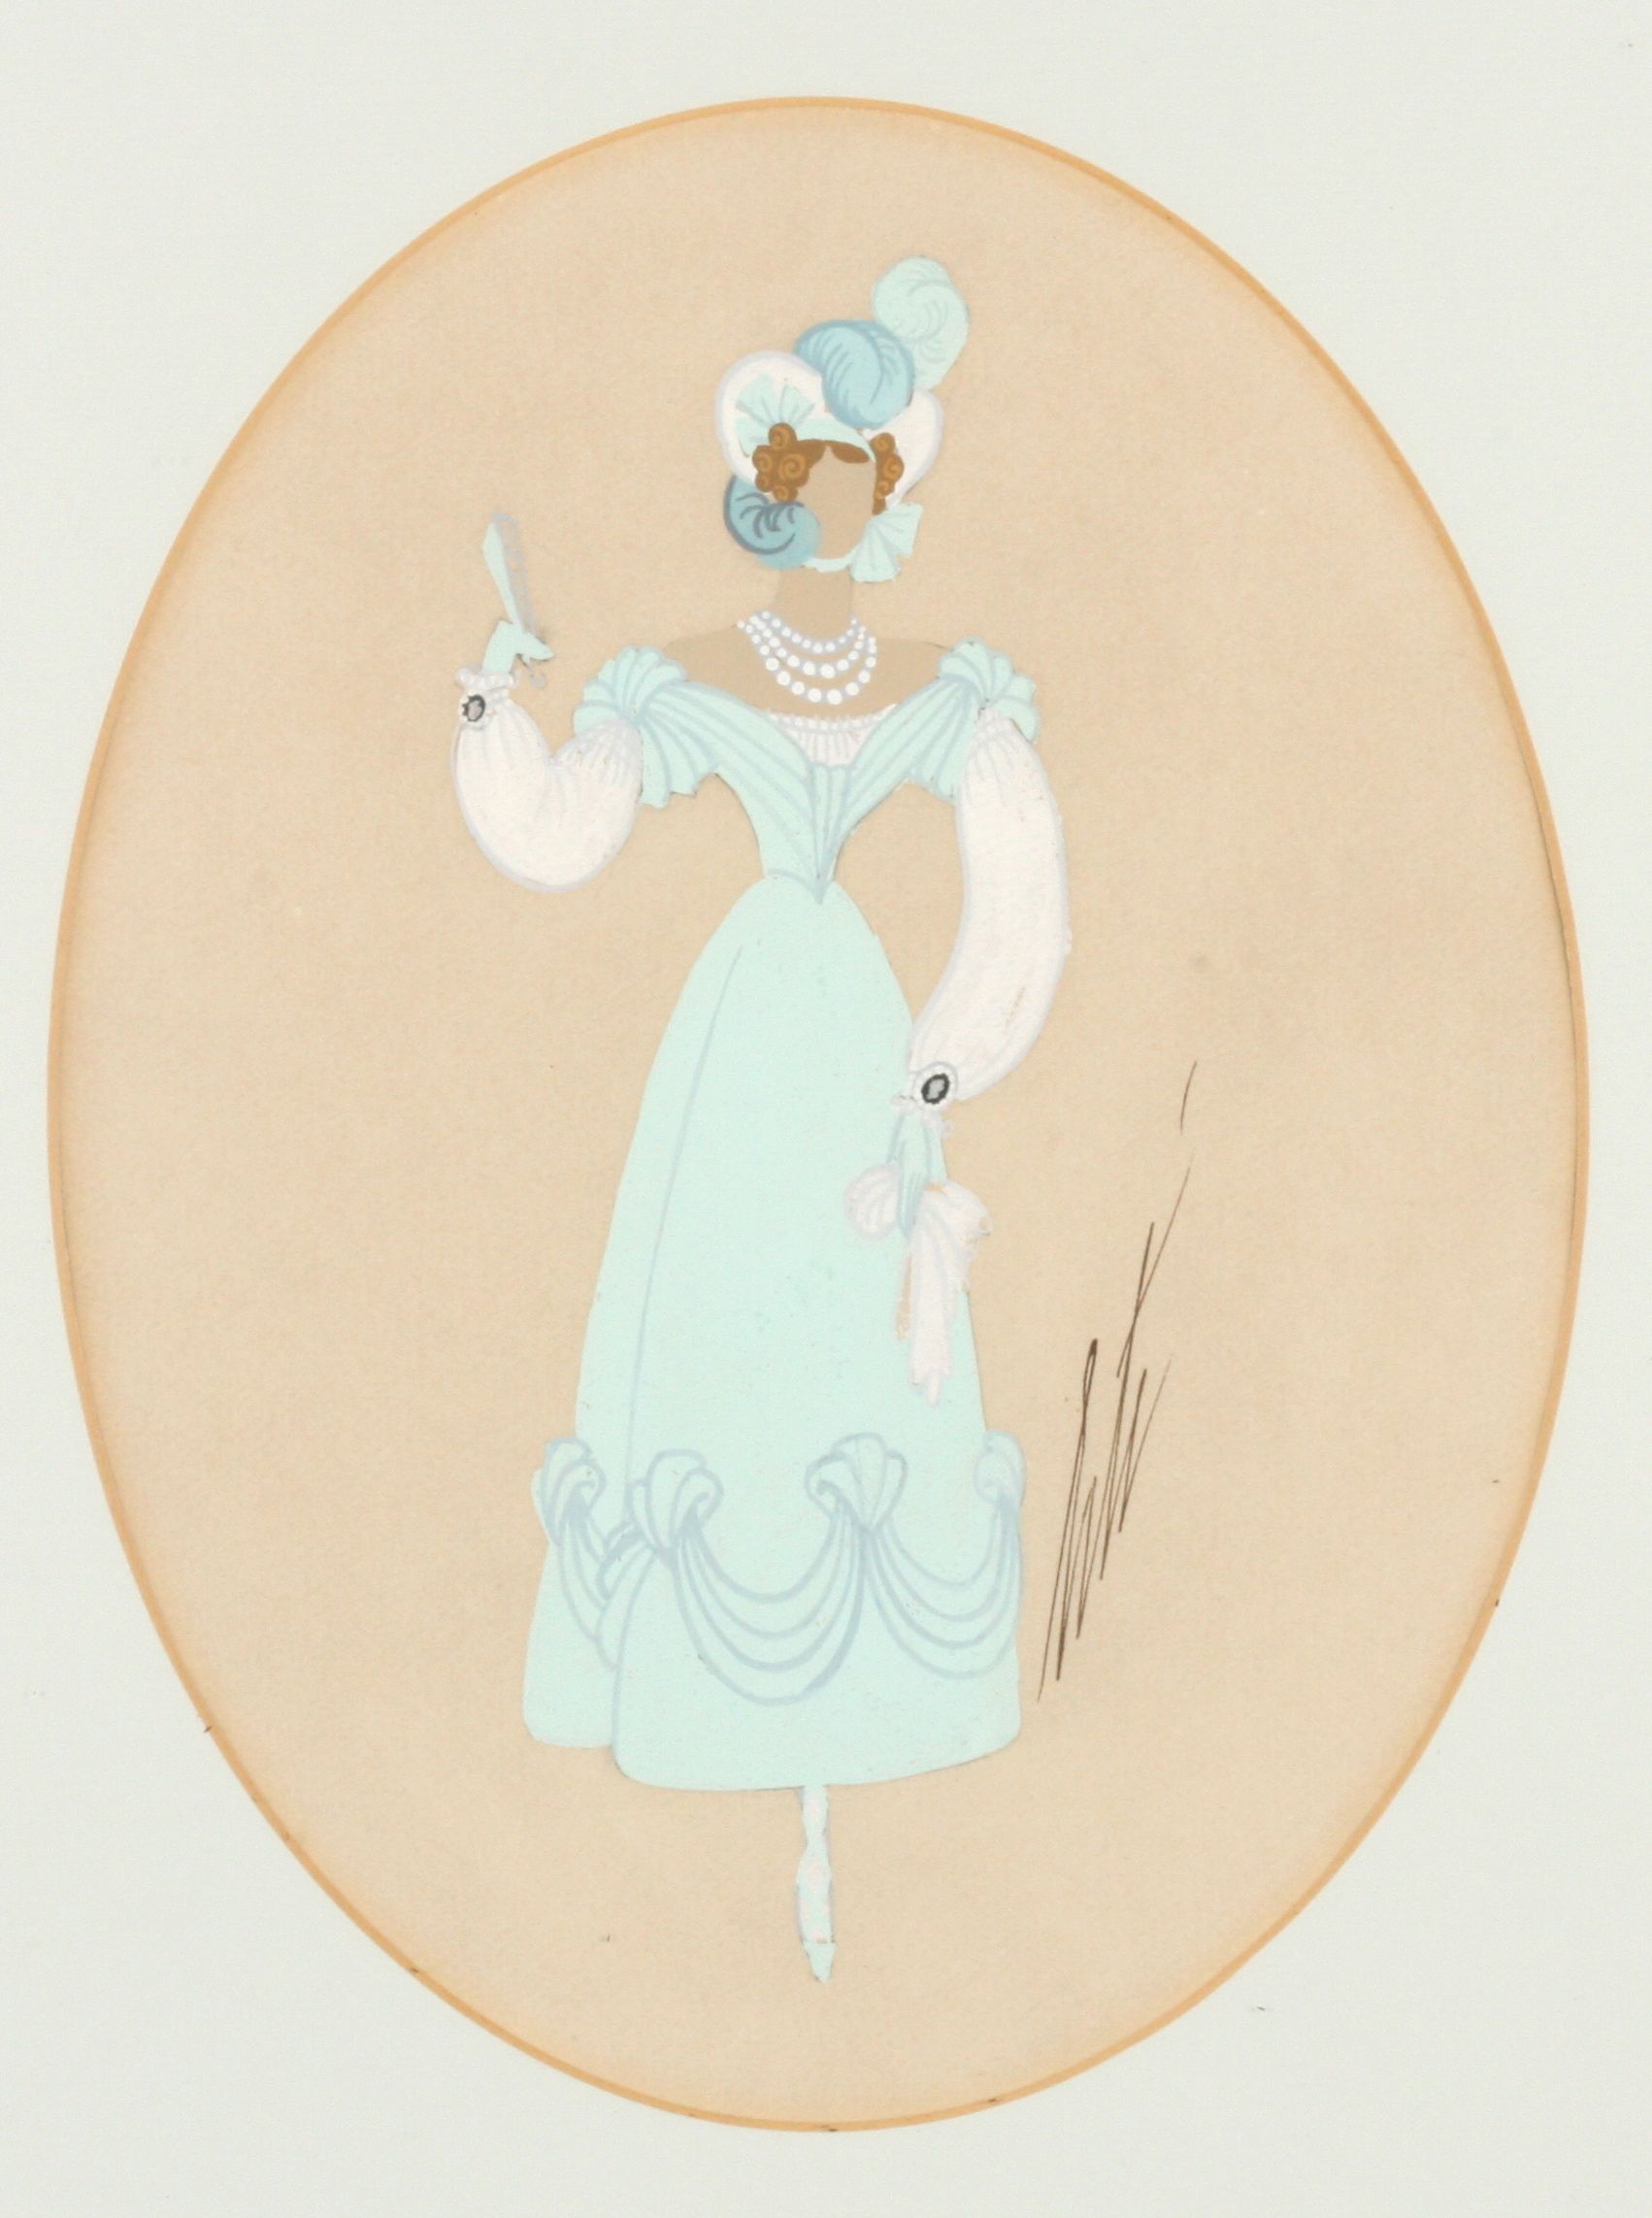 Erte (1892-1990)
Theatrical costume design
1950s
pencil and hand colour, signed in pen, probably a